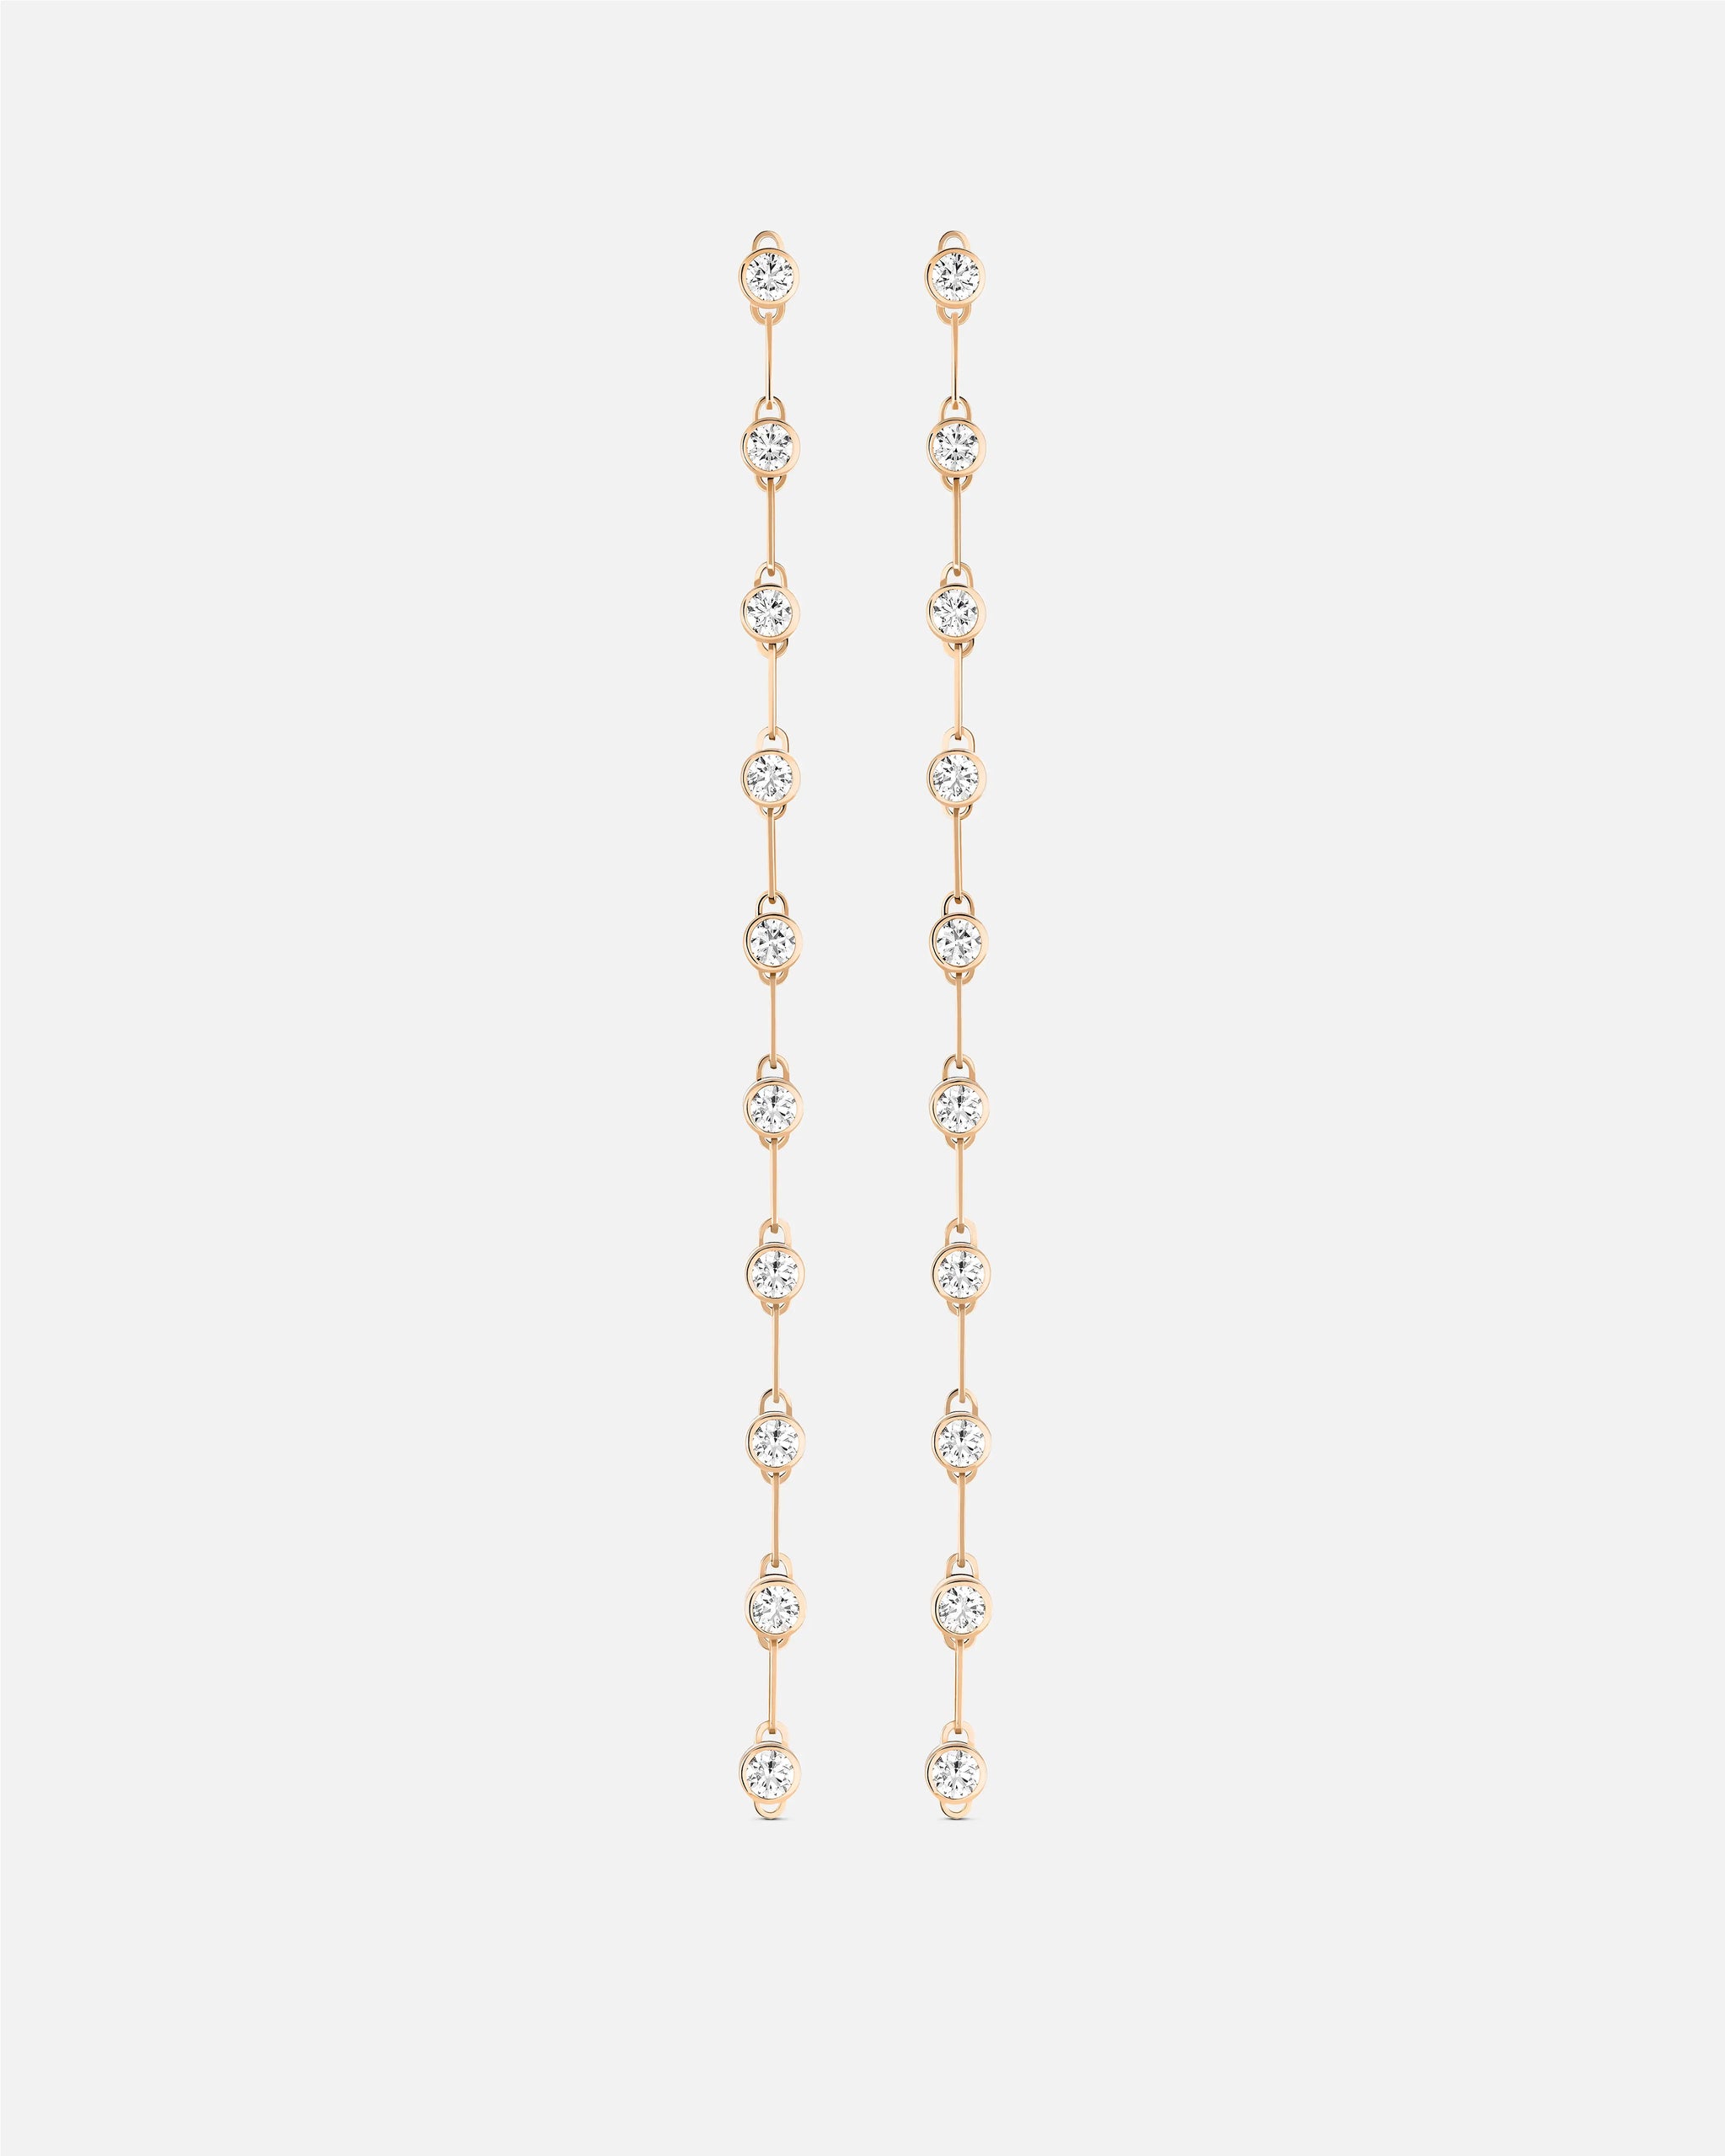 Gala GM Classics Earrings in Rose Gold - 1 - Nouvel Heritage